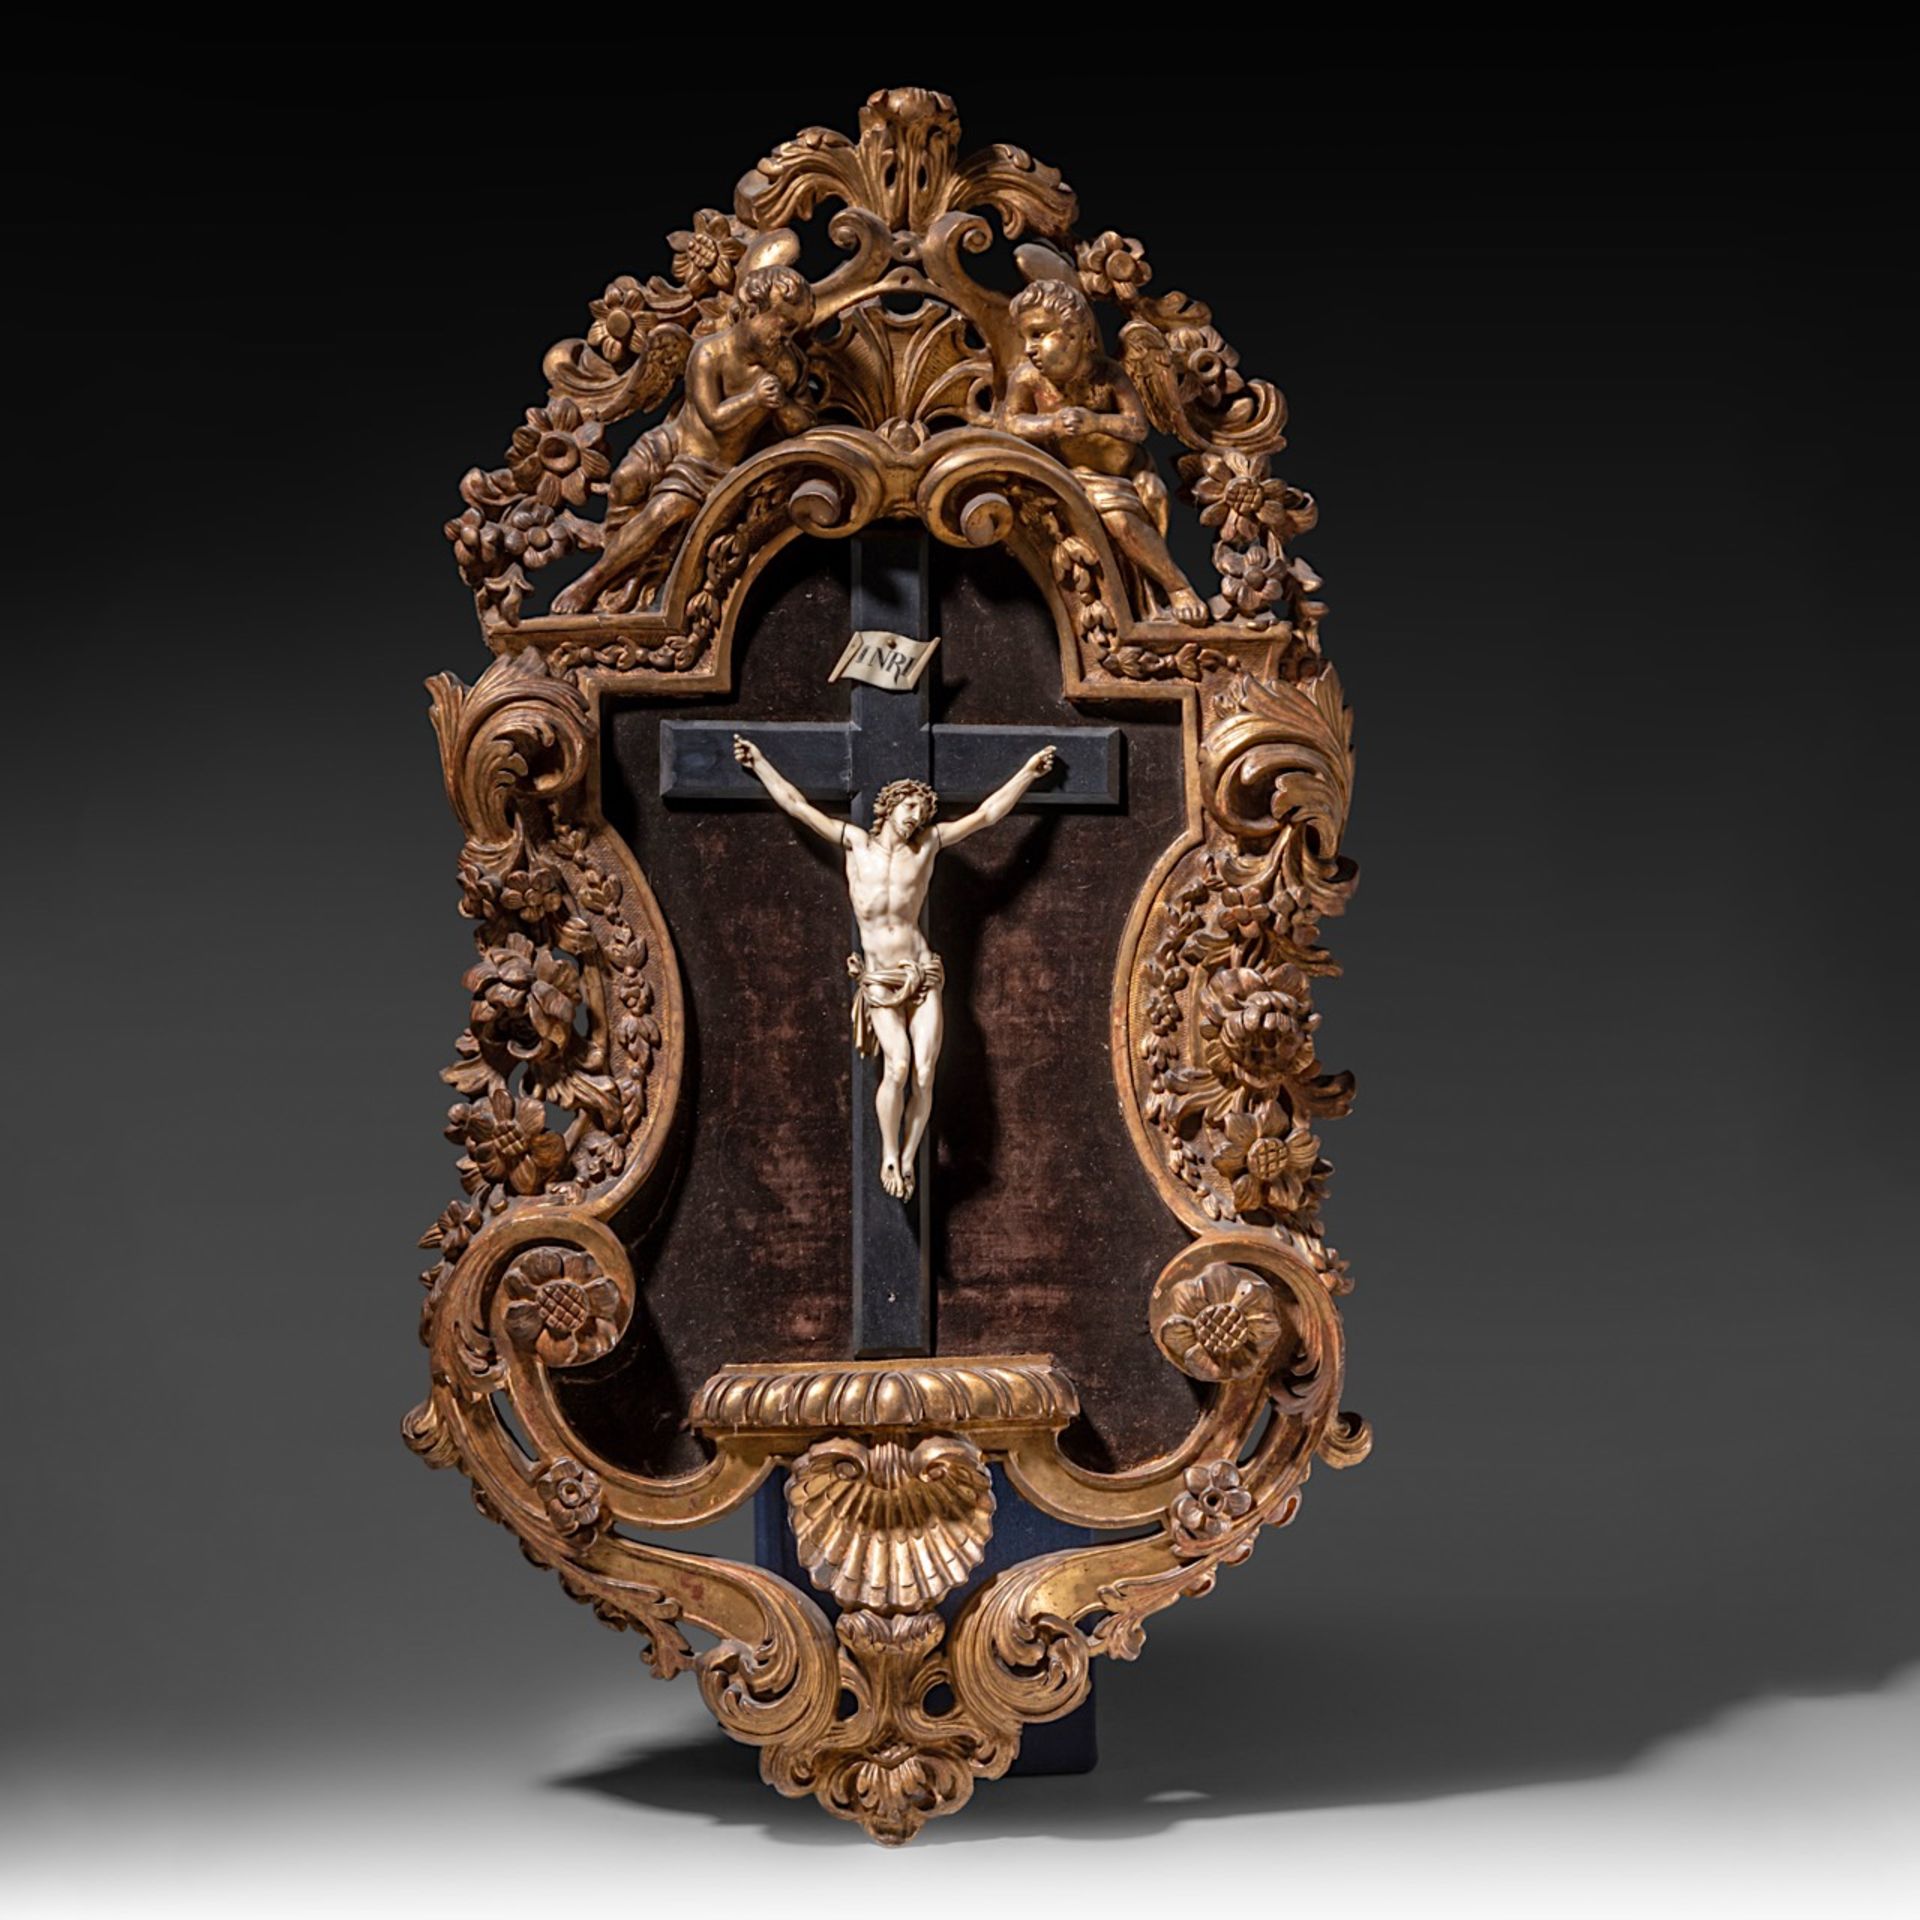 Ivory corpus Christi in a baroque style sculpted and gilded wood frame, 19thC, French, H 82 (frame)